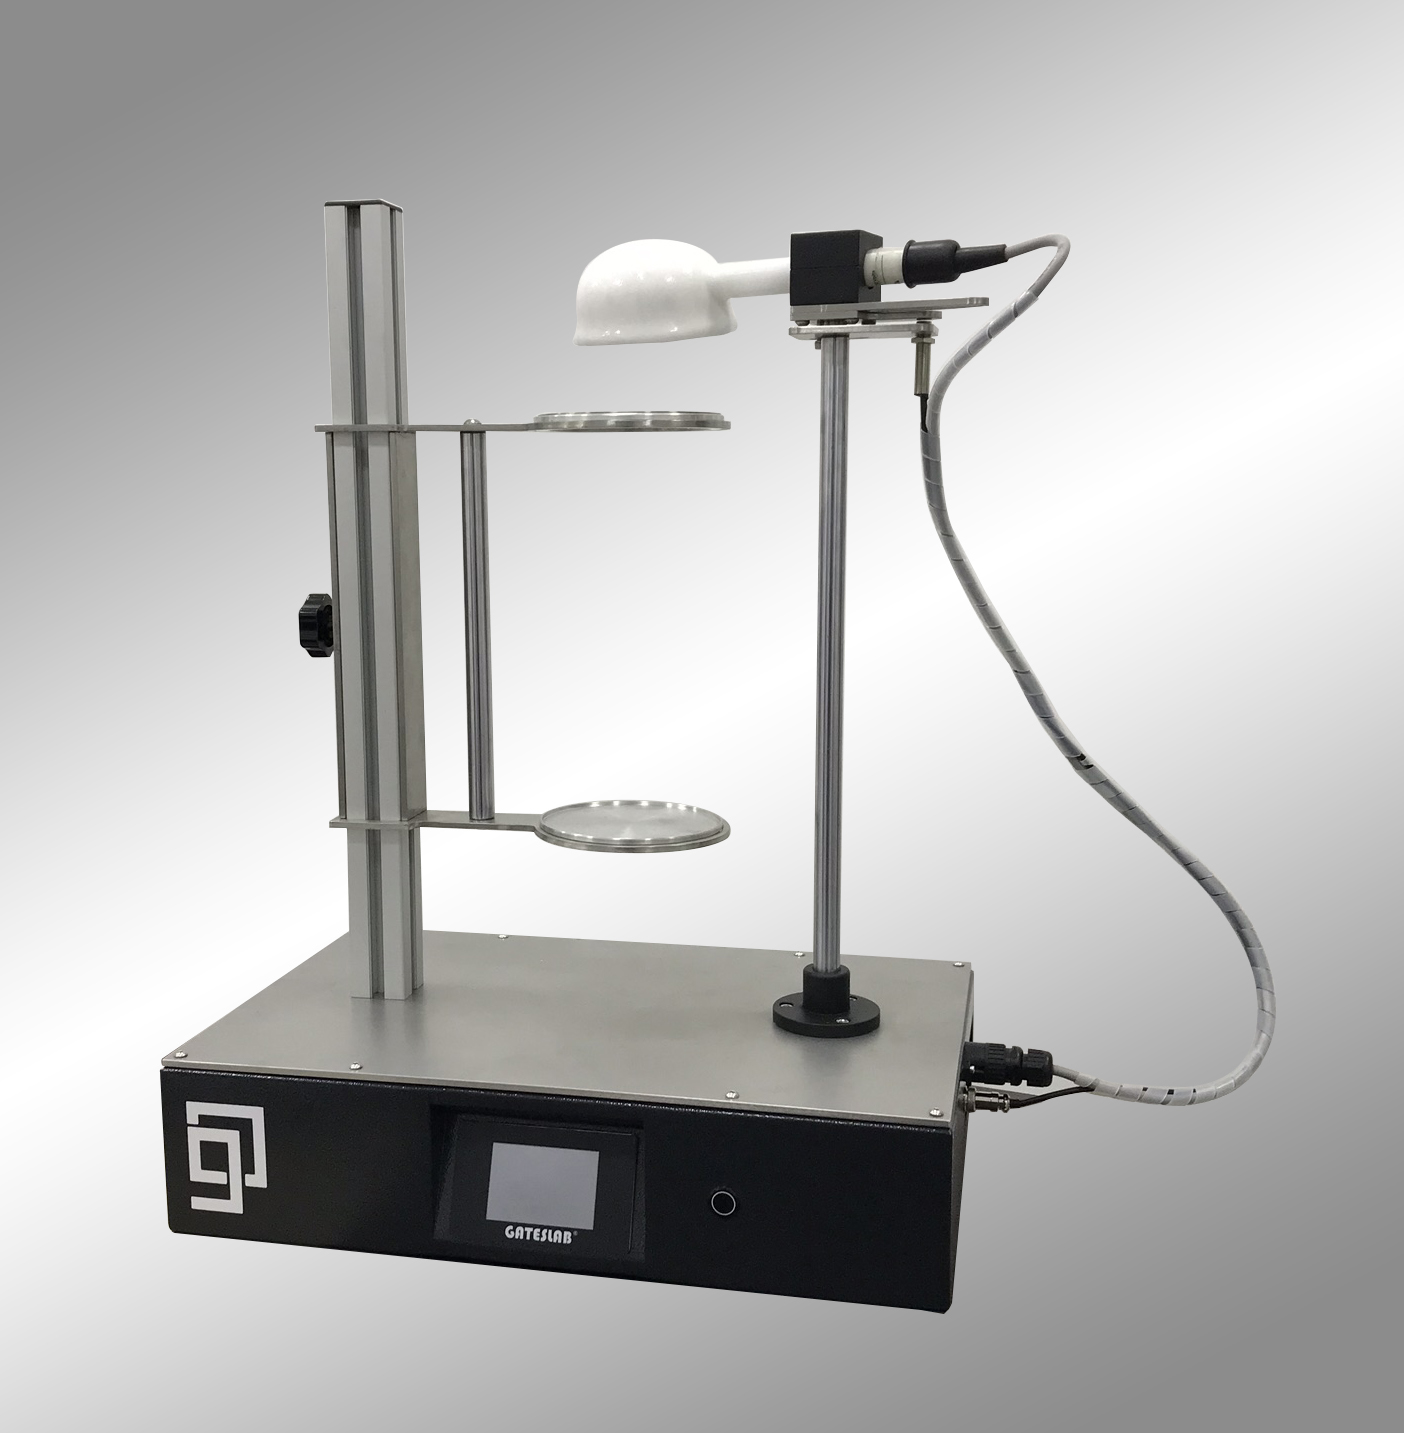 45° FLAMMABILITY TESTER used to detect the flame propagation characteristics (flame spreading speed, destructed length, duration of torch burning and so on) of single  or multi-component textile products used as clothing, curtains and upholstery in the samples fired at the edge at 45 degrees position.